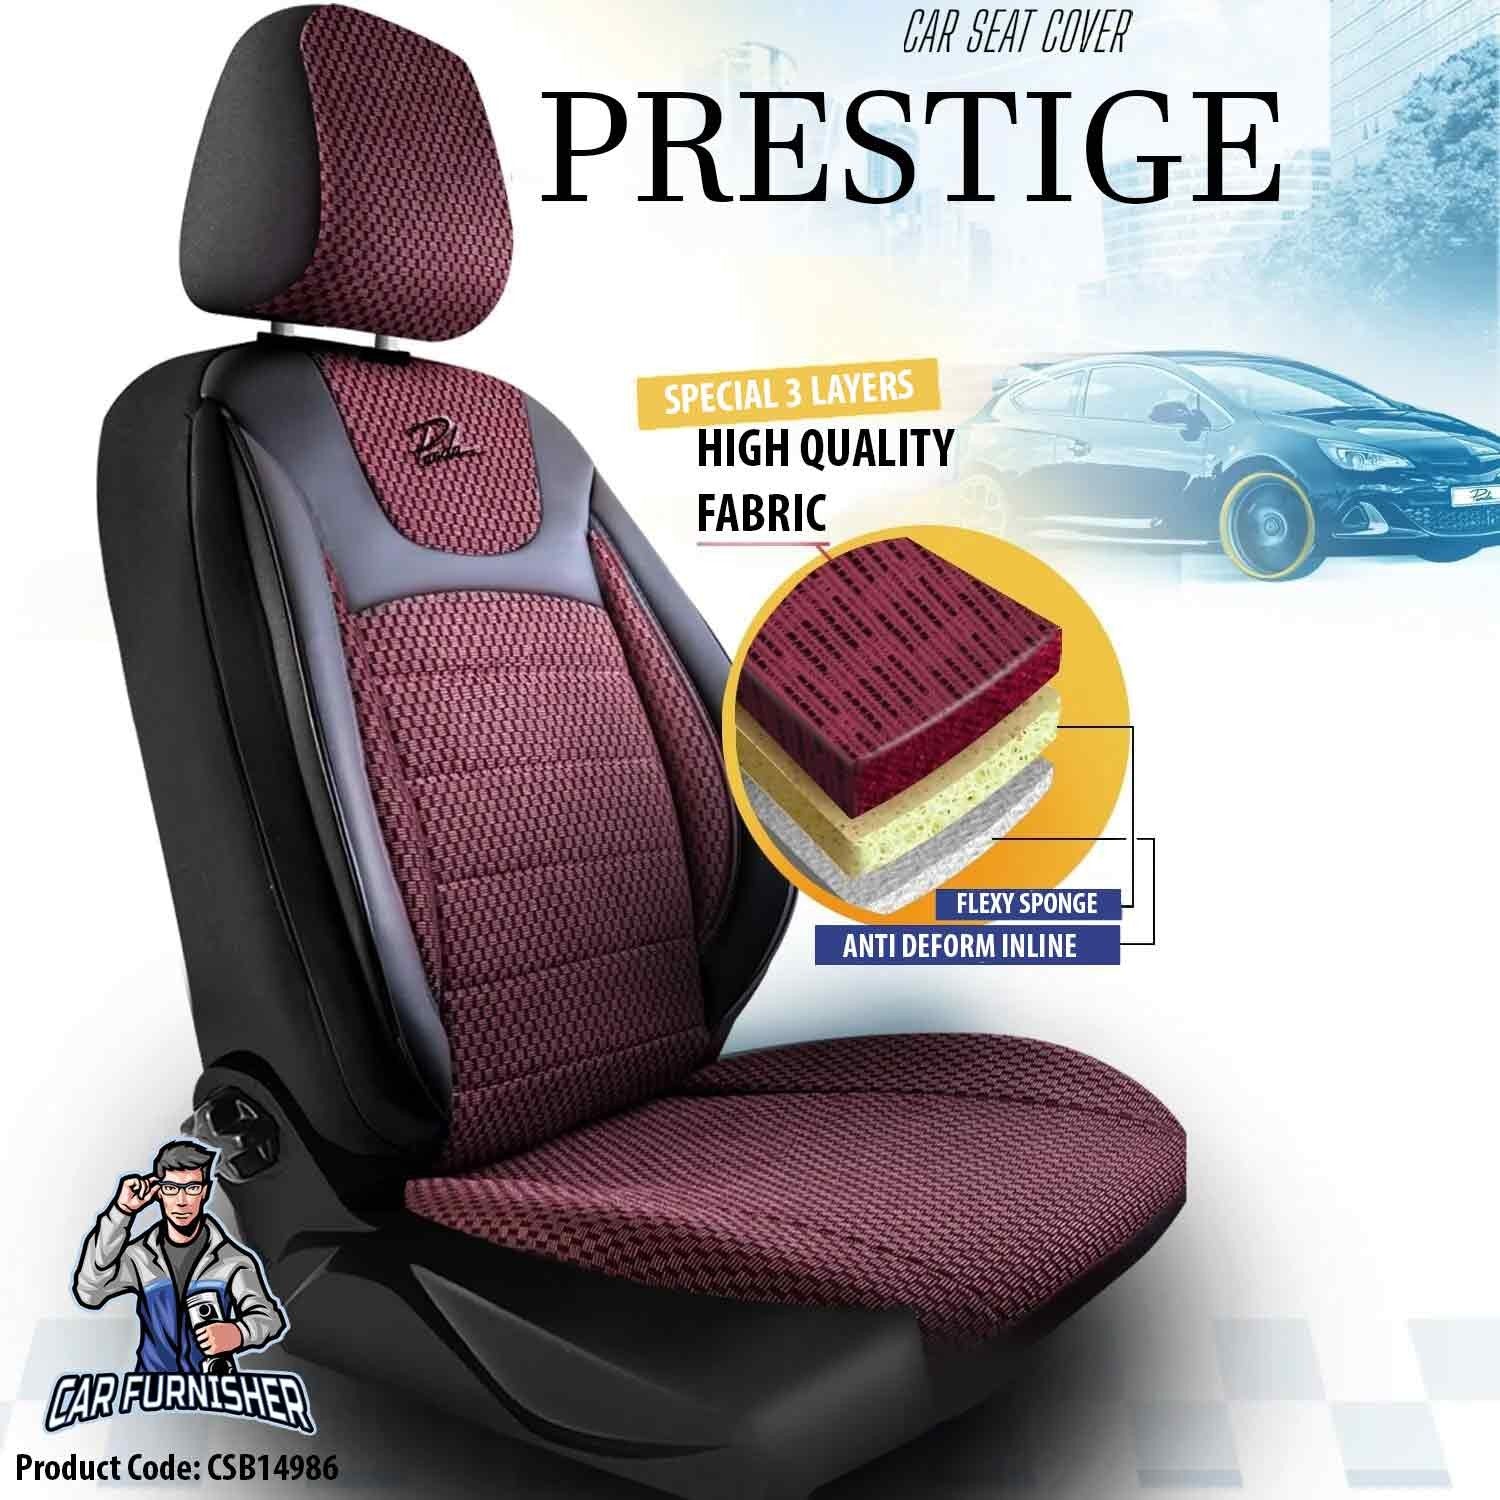 Luxury Car Seat Cover Set (5 Colors) | Prestige Series Burgundy Leather & Fabric